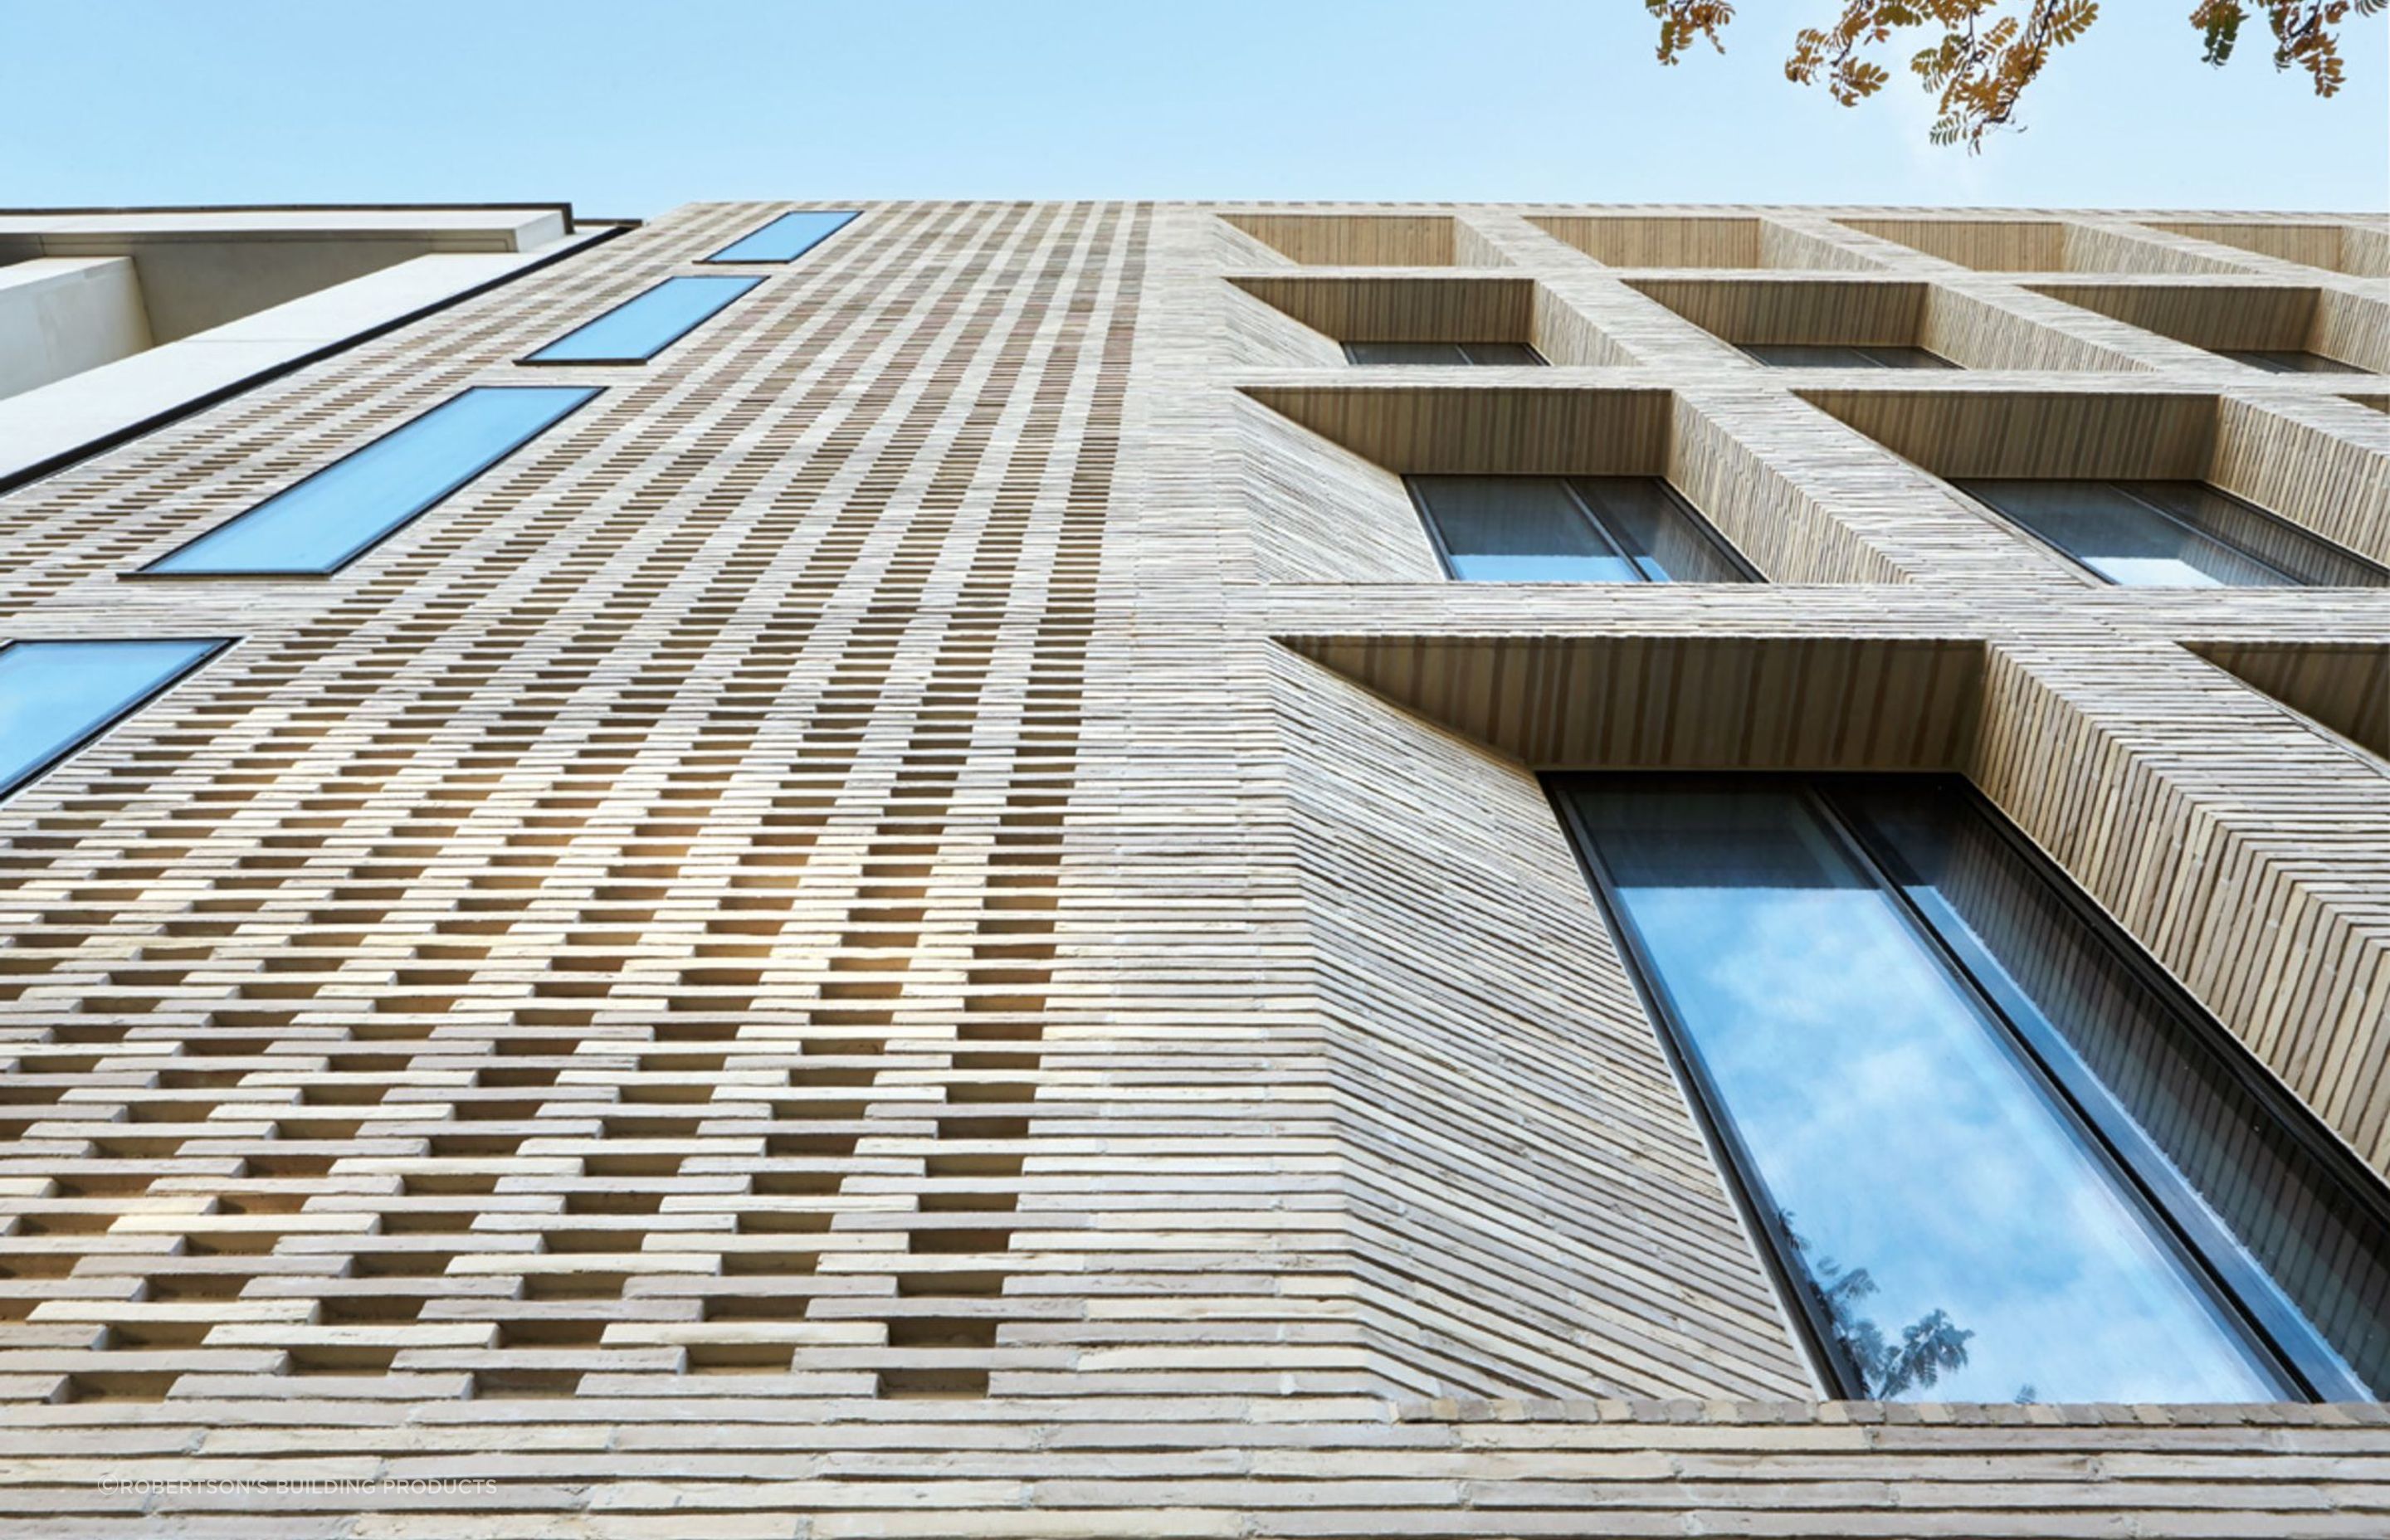 Customised bricks offer buyers flexibility of application, but tend to feature predominantly on external walls. Featured product: Peterson Custom Bricks by Robertson's Building Products